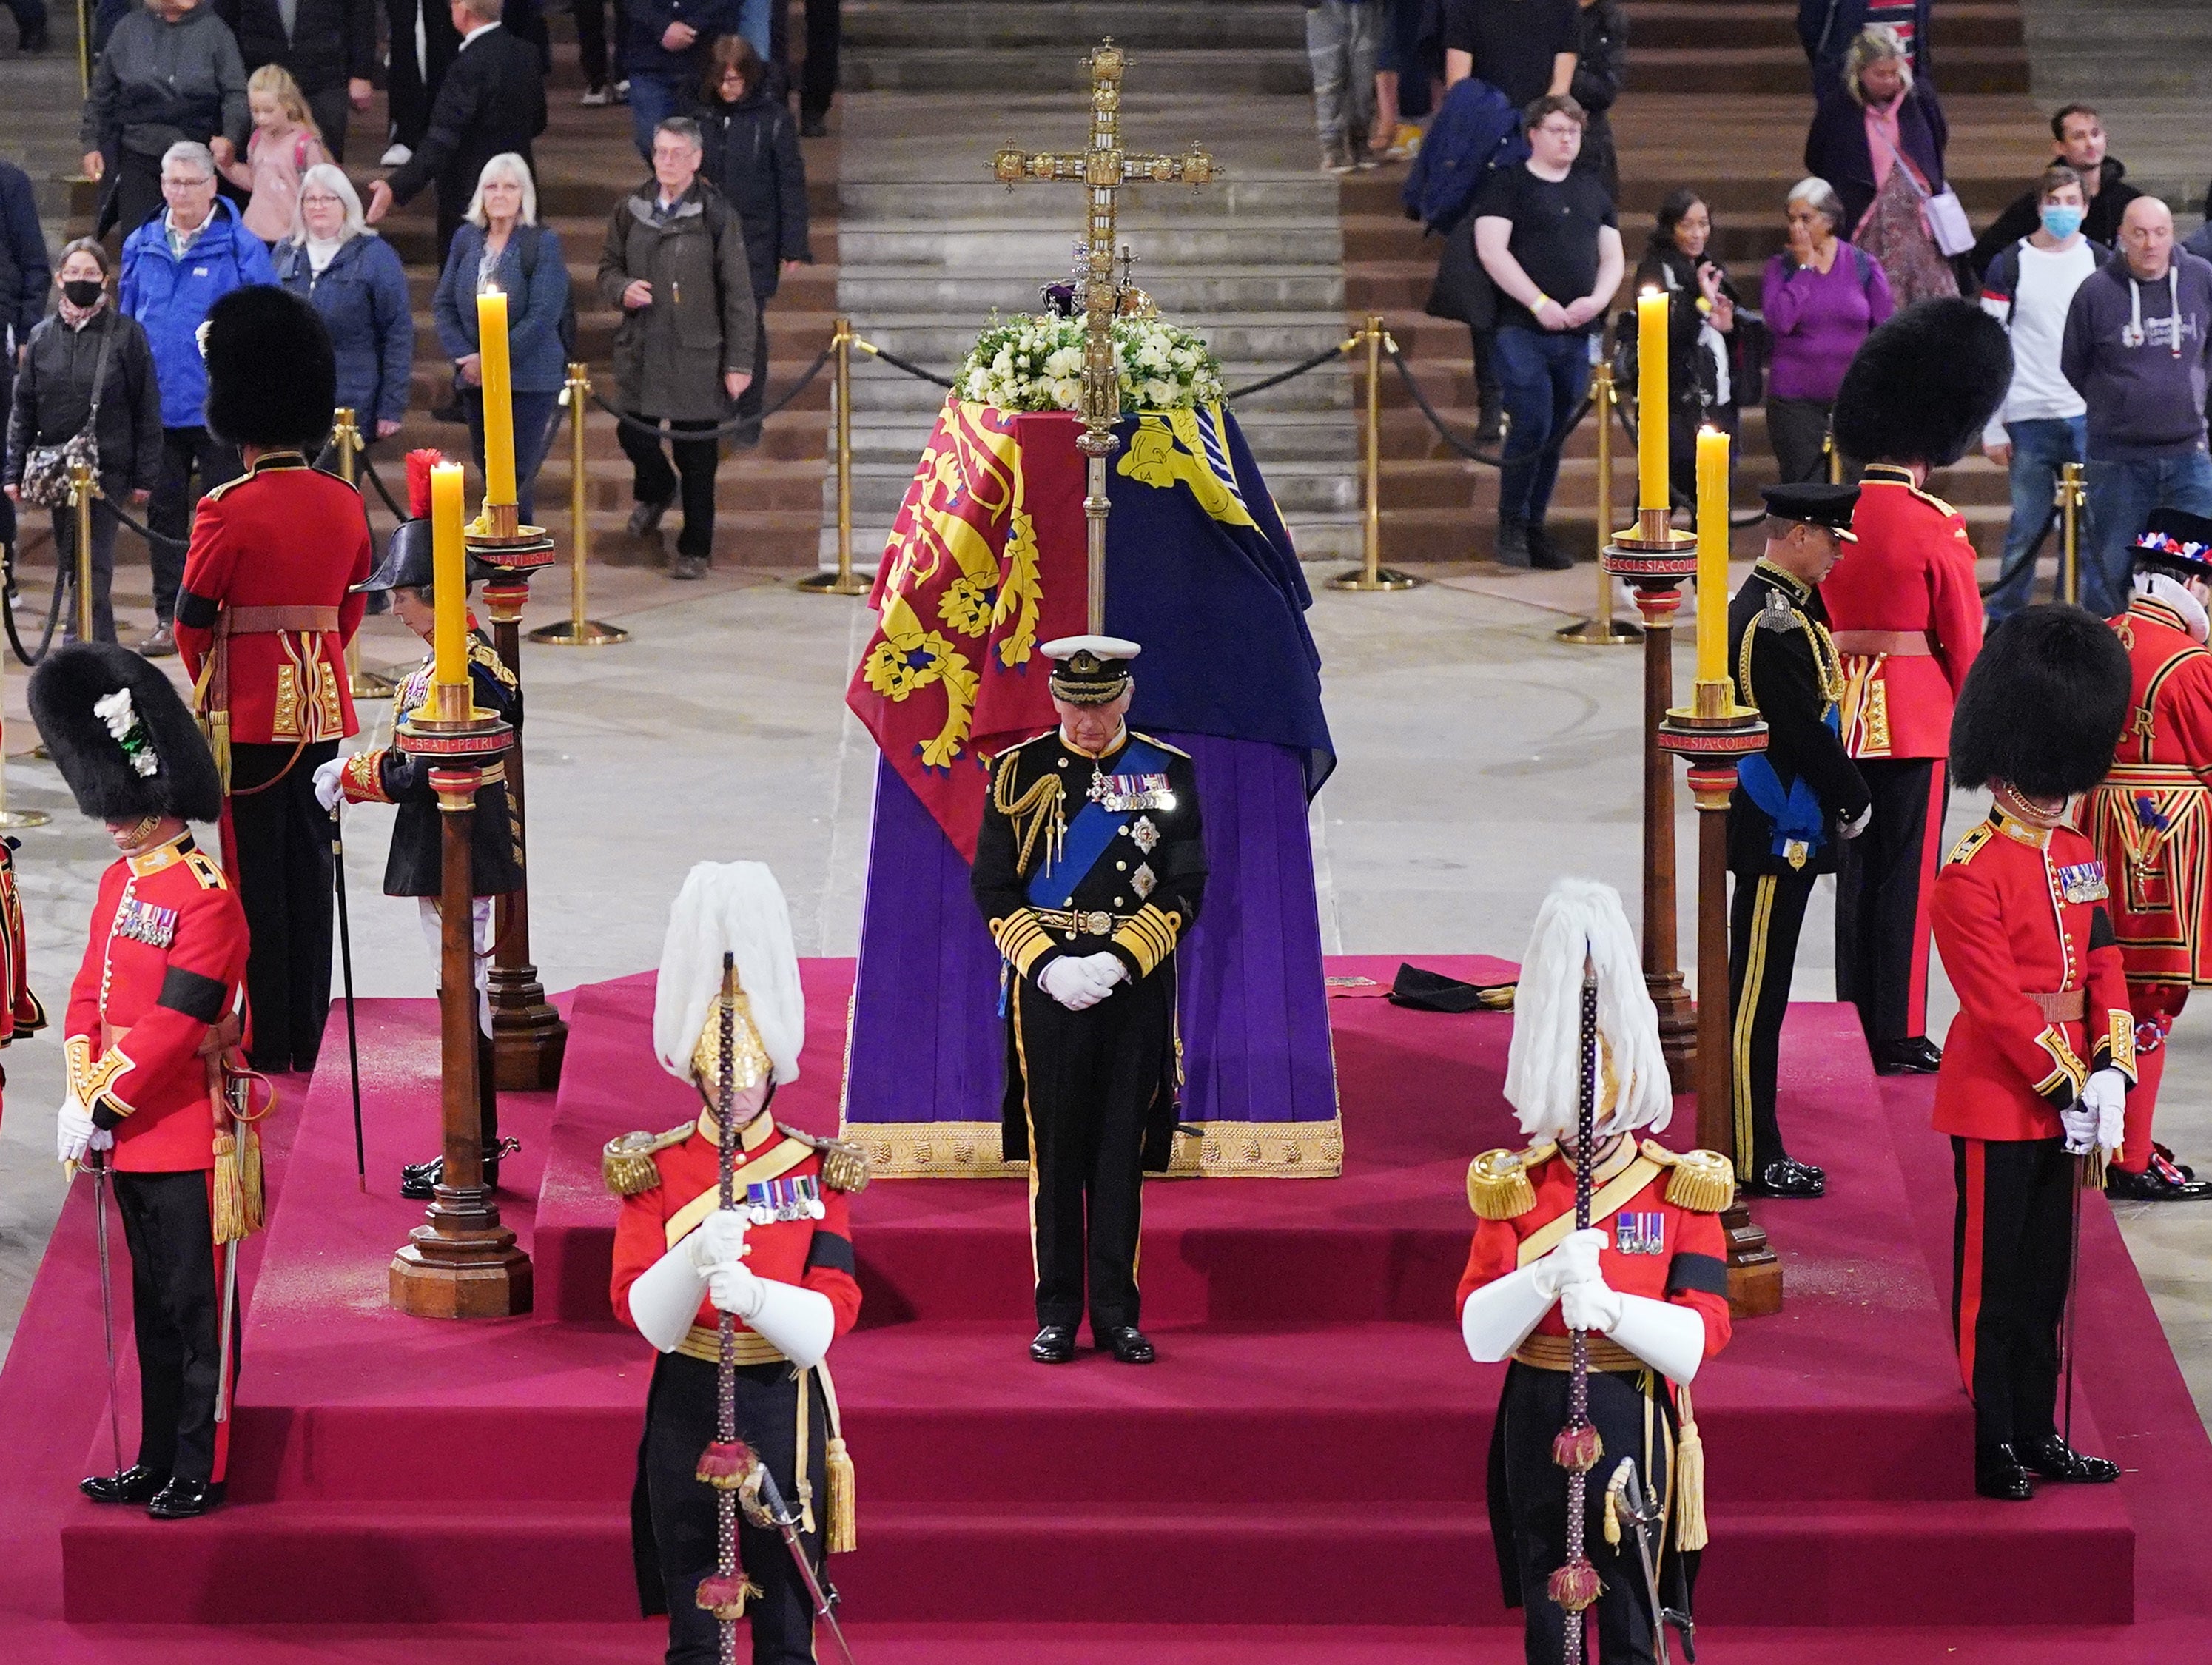 King Charles III, the Princess Royal, the Duke of York and the Earl of Wessex hold a vigil beside the coffin of their mother, Queen Elizabeth II, as it lies in state on the catafalque in Westminster Hall at the Palace of Westminster, London (Yui Mok/PA)